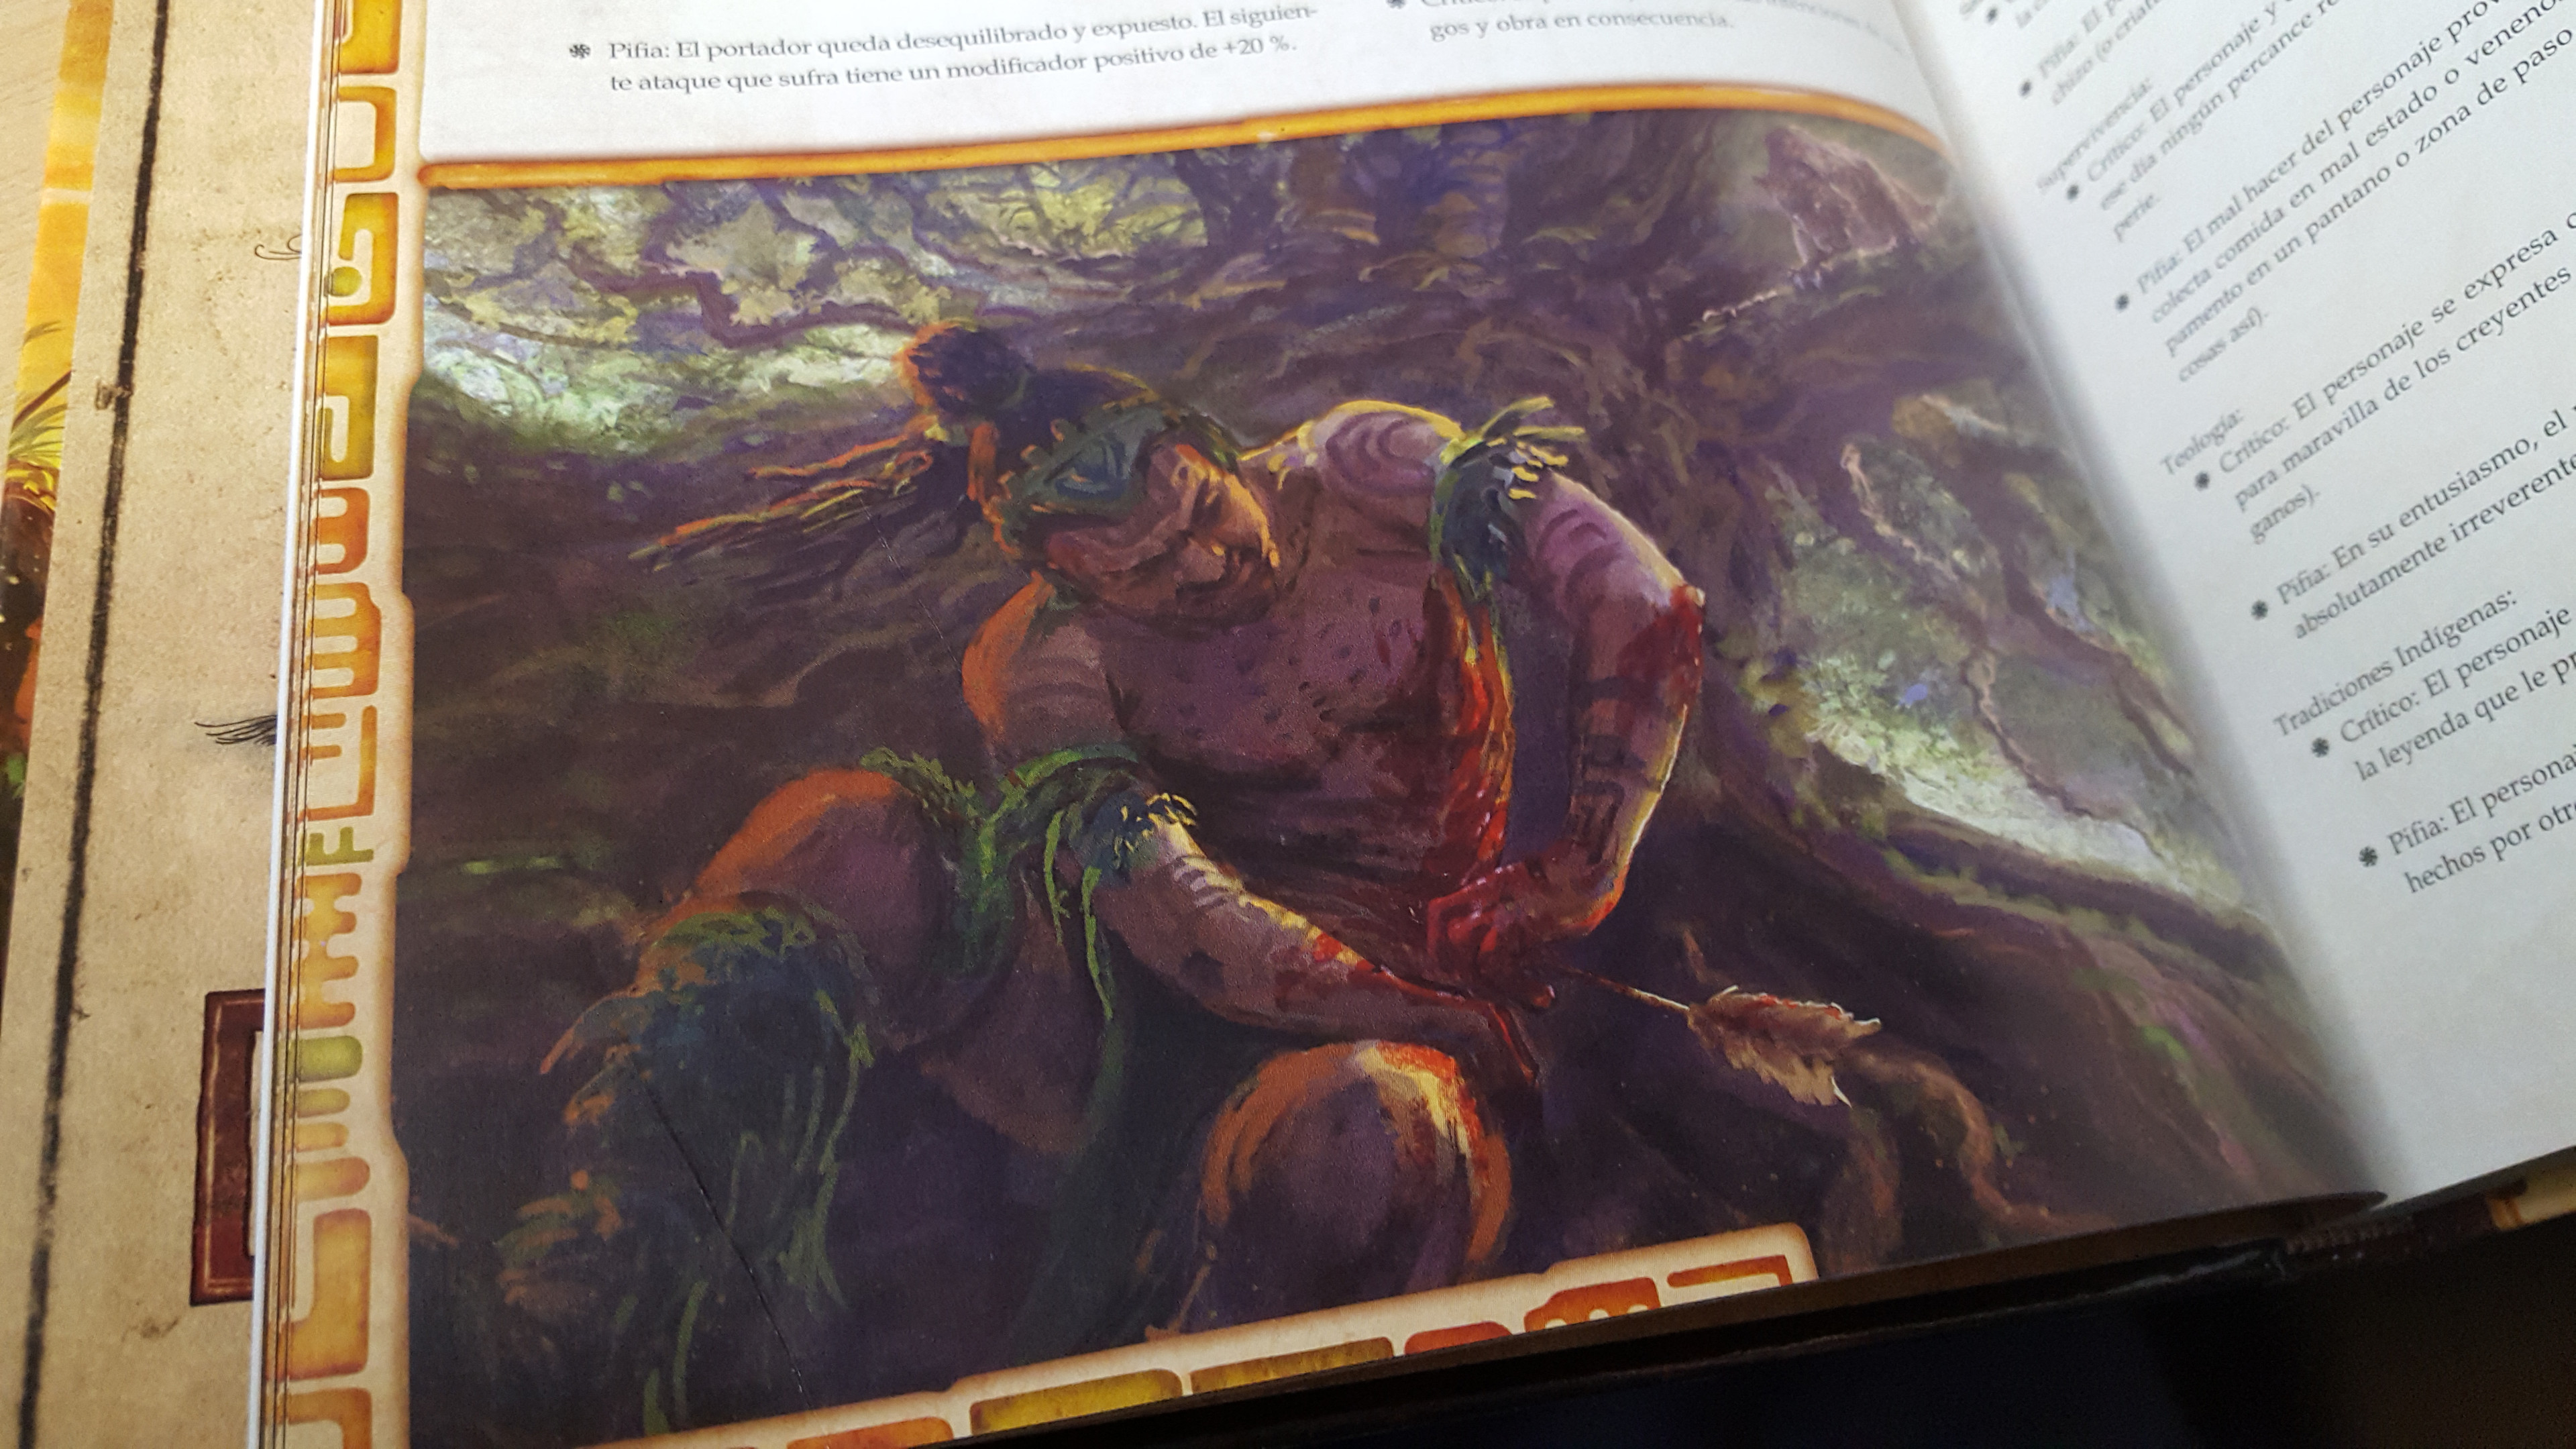 Printed edition in the game's book